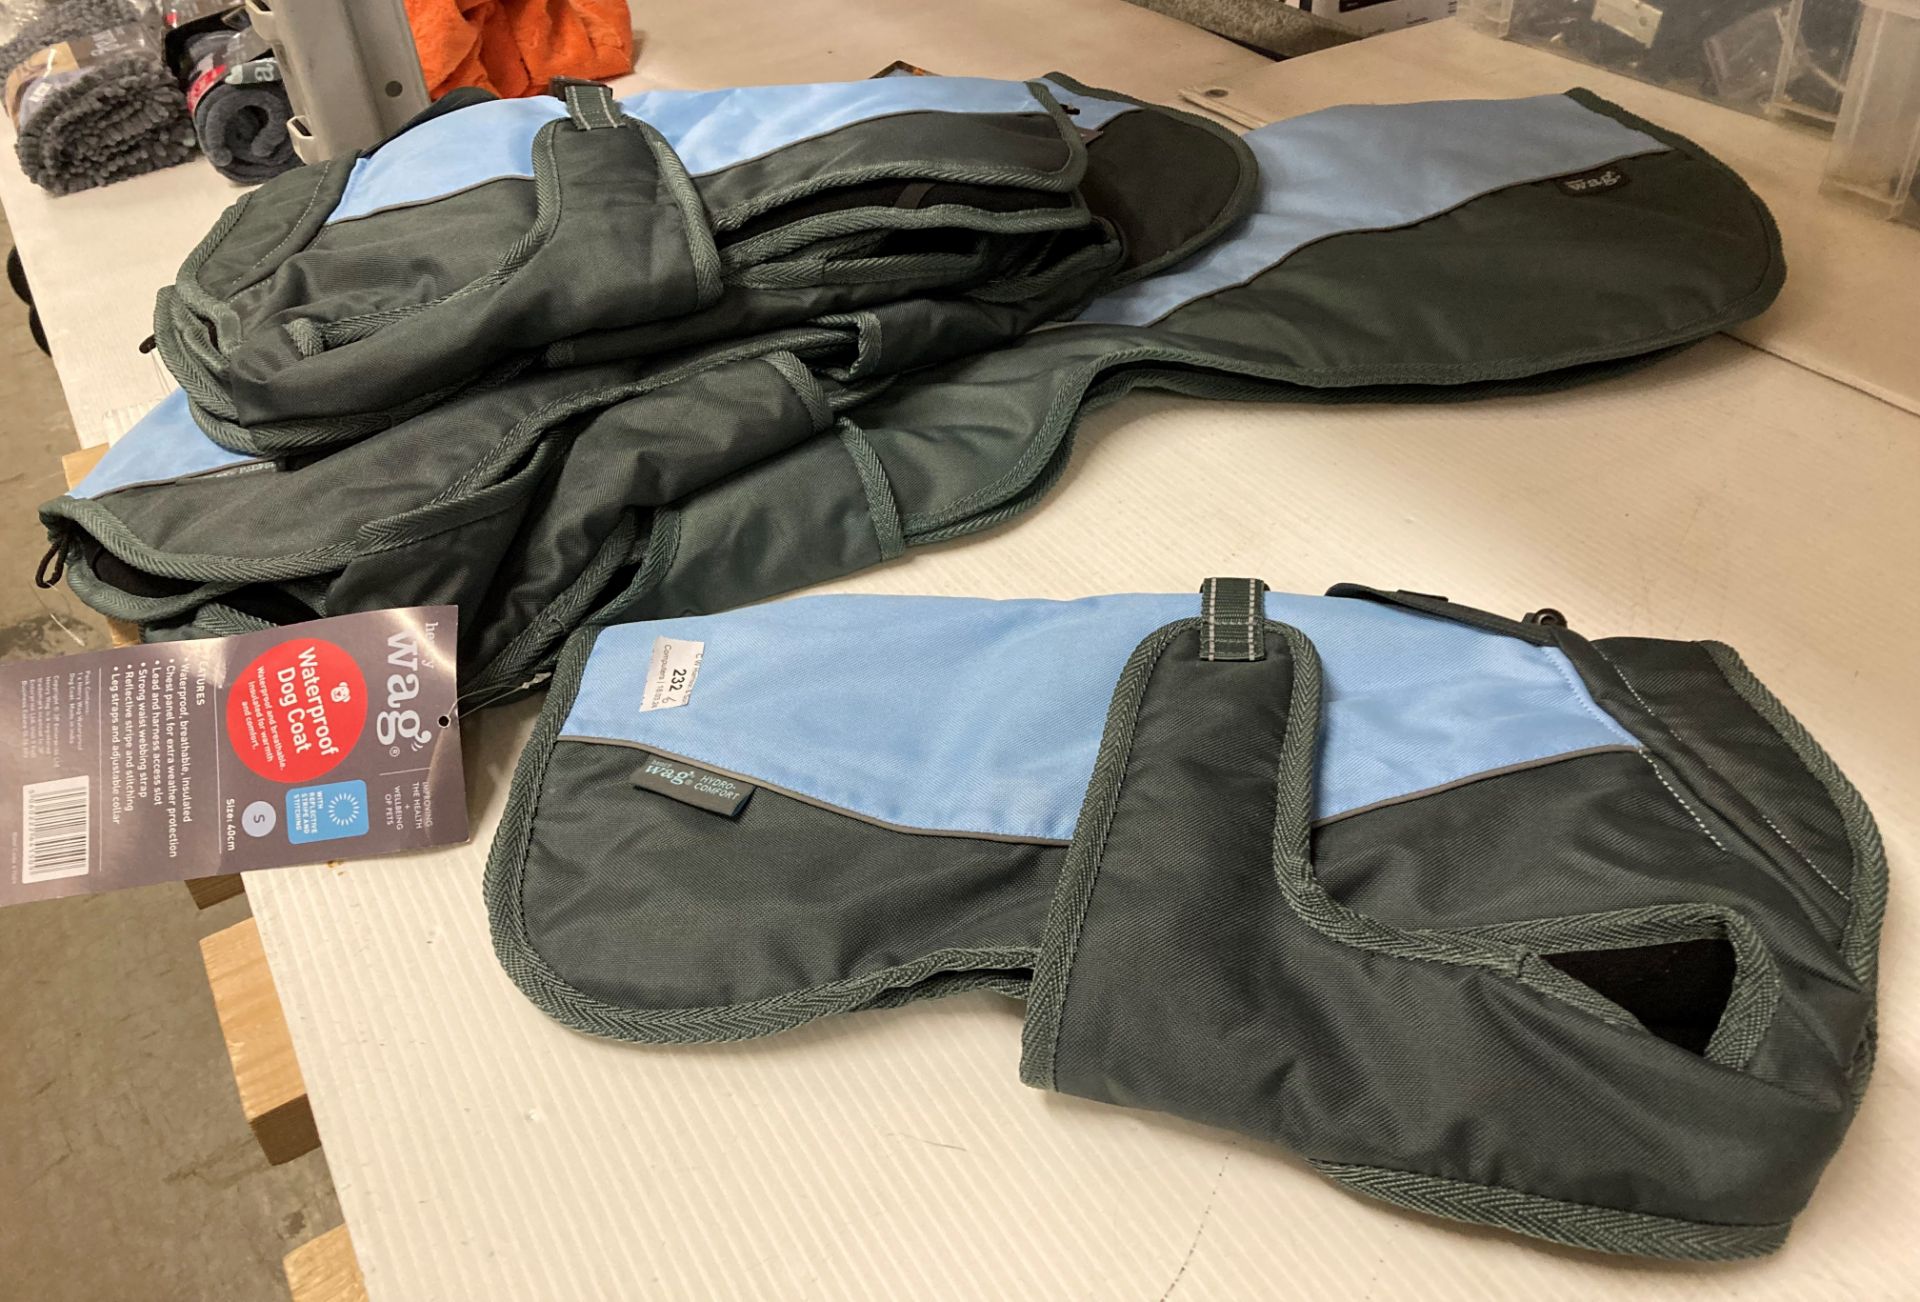 6 x Henry Wag waterproof dog coats in various sizes (saleroom location: F10)